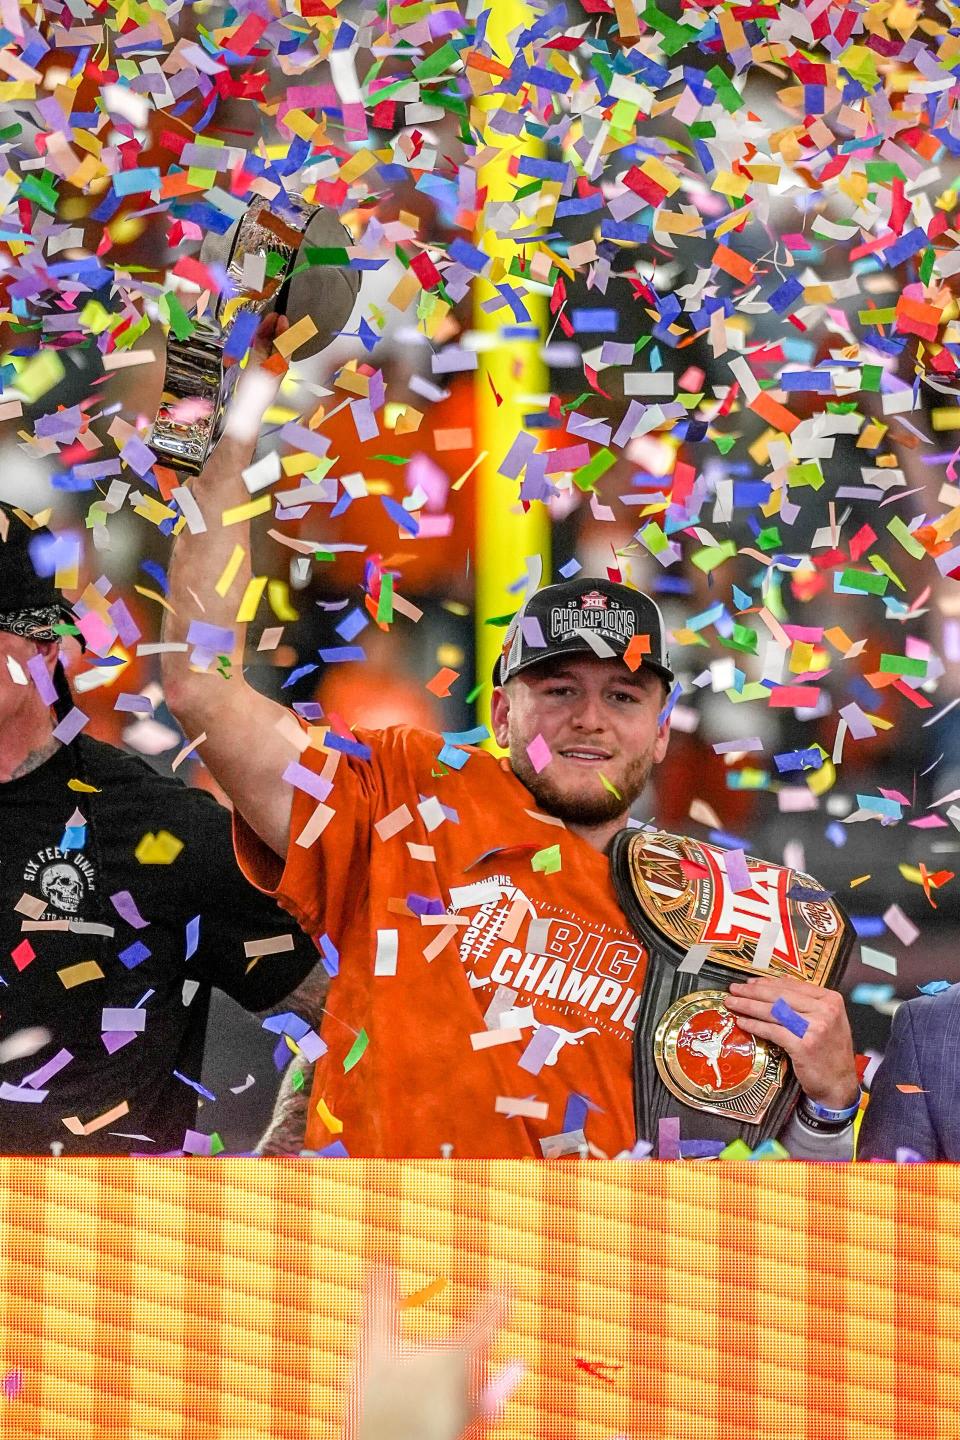 Texas quarterback Quinn Ewers holds up the Big 12 Championship Trophy after leading the Longhorns to a 49-21 win over Oklahoma State at AT&T Stadium on Dec. 2. Ewers guided Texas into the CFP field.